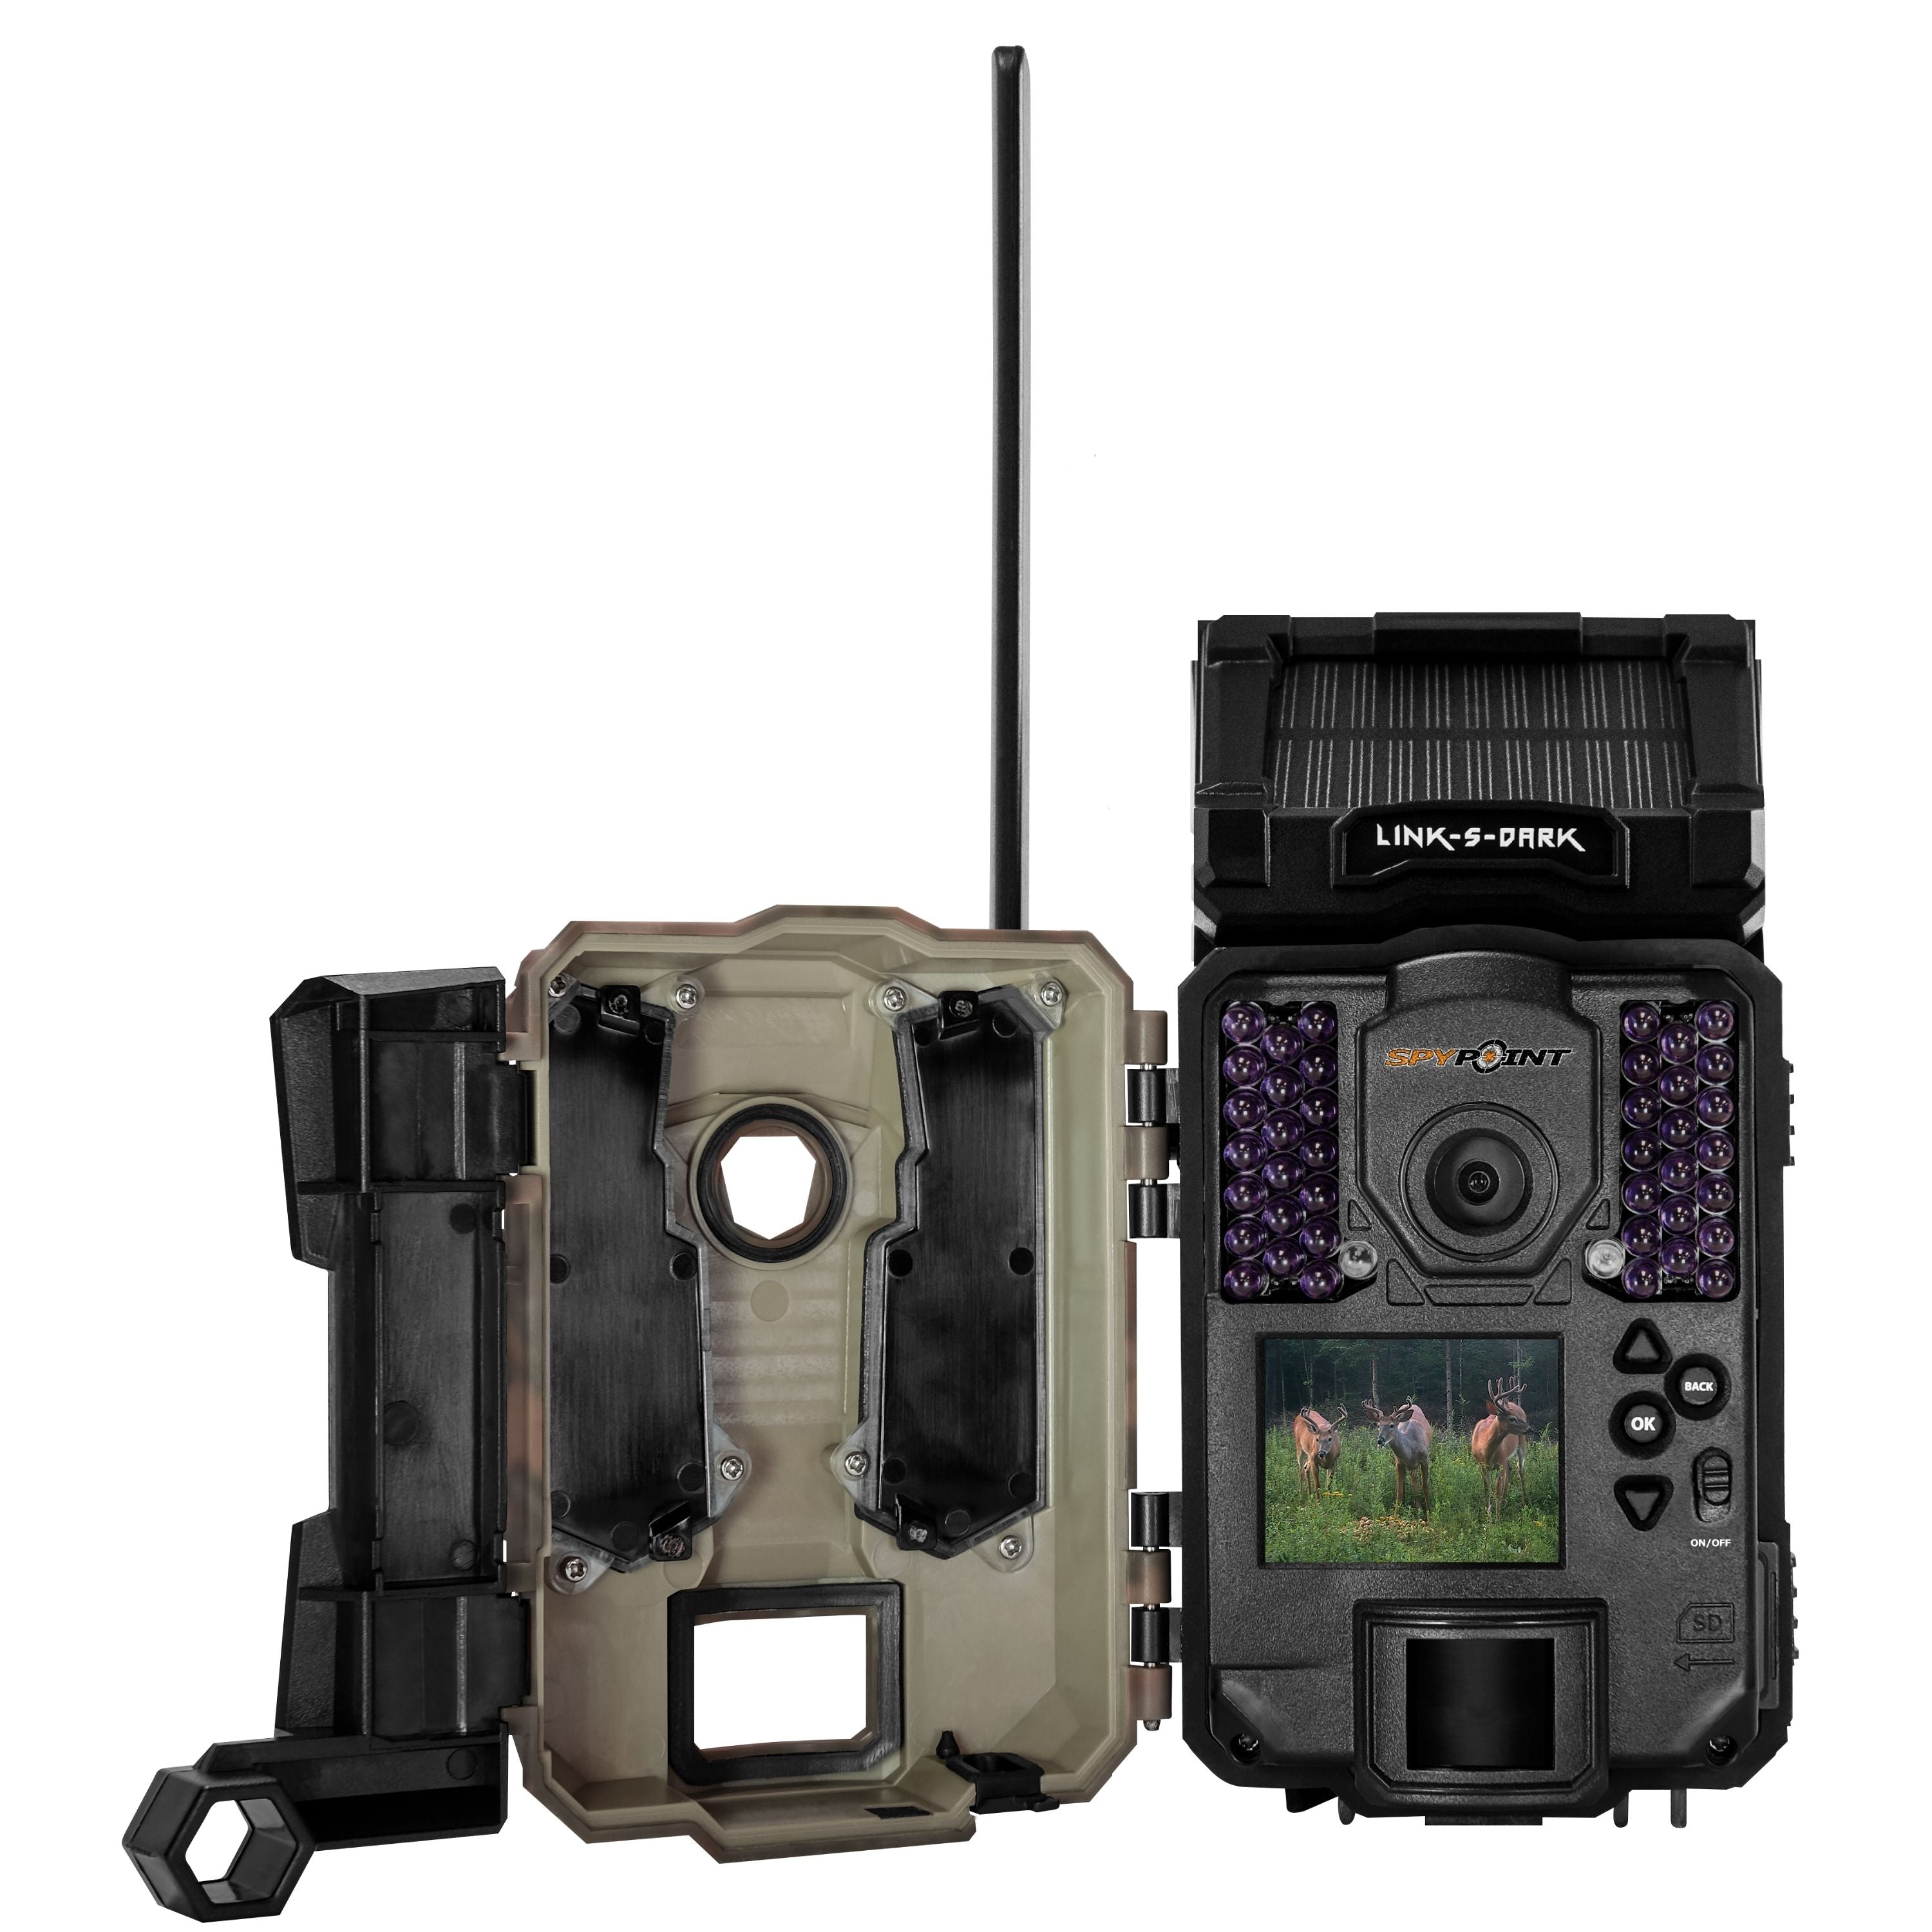 Caméra cellulaire Link-S-dark avec panneau solaire et écran||Link-S-dark cellular trail camera with solar panel and viewing screen